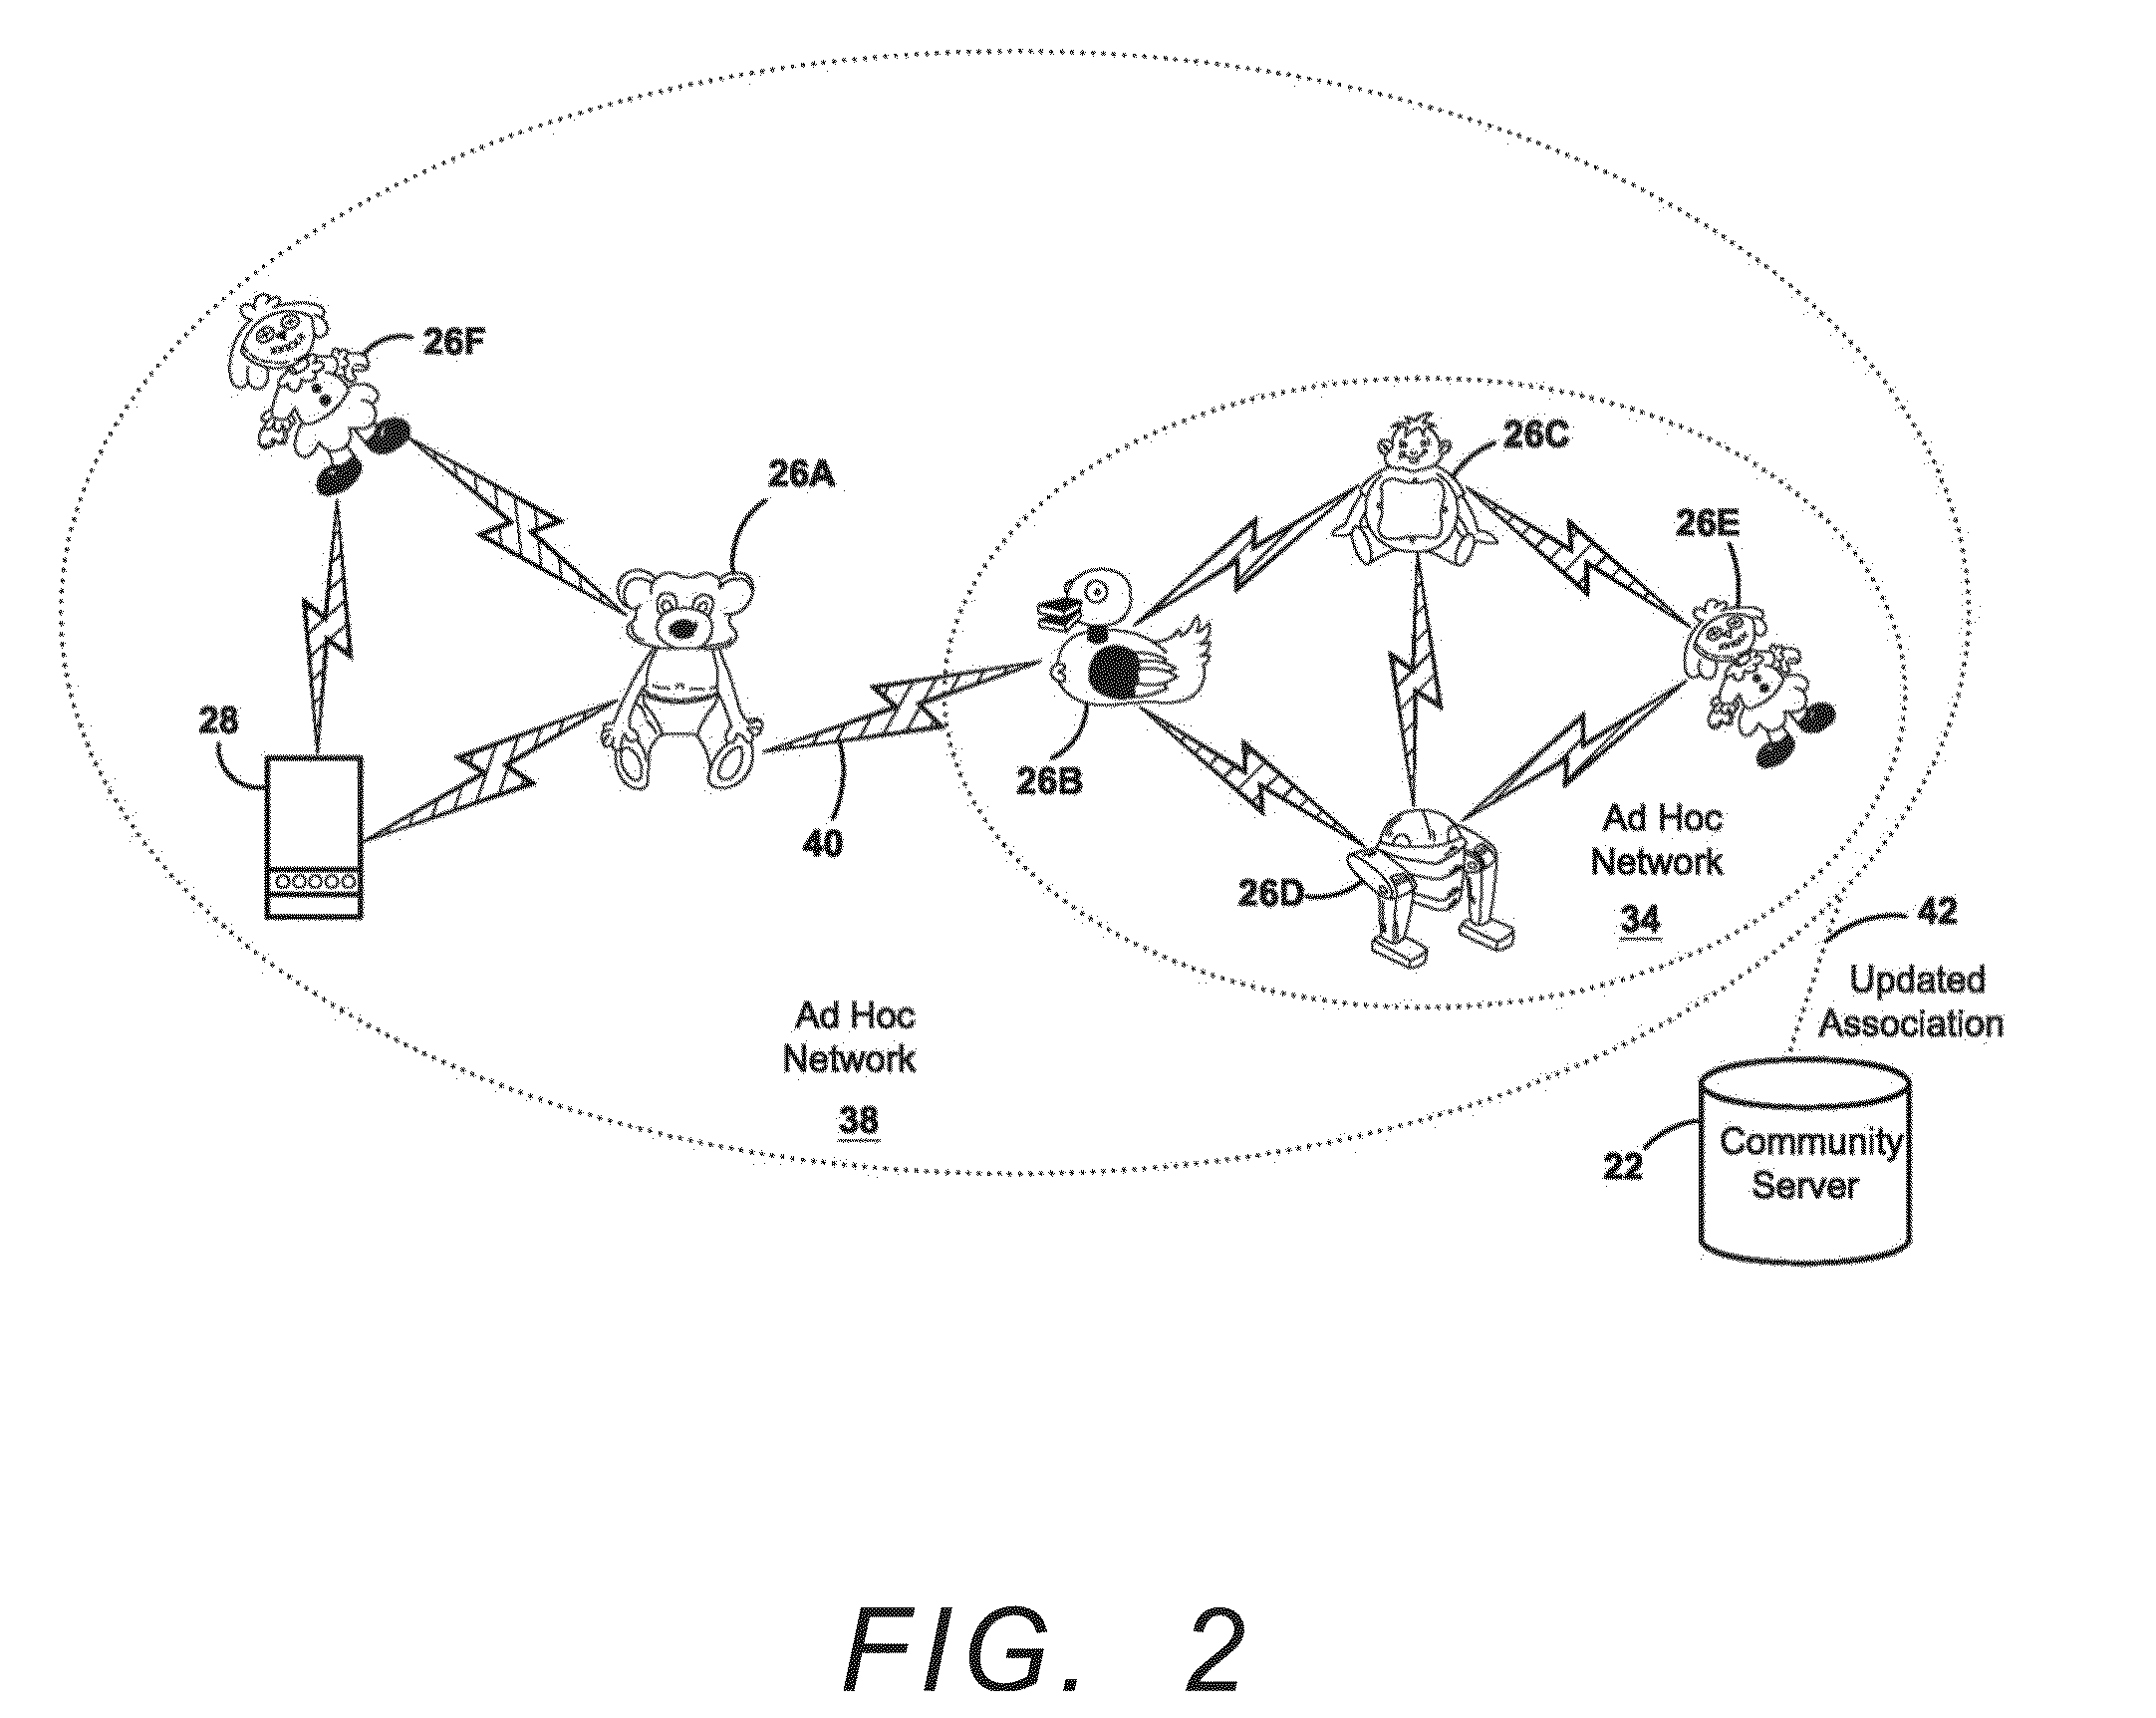 Temporal network server connected devices with off-line ad hoc update and interaction capability